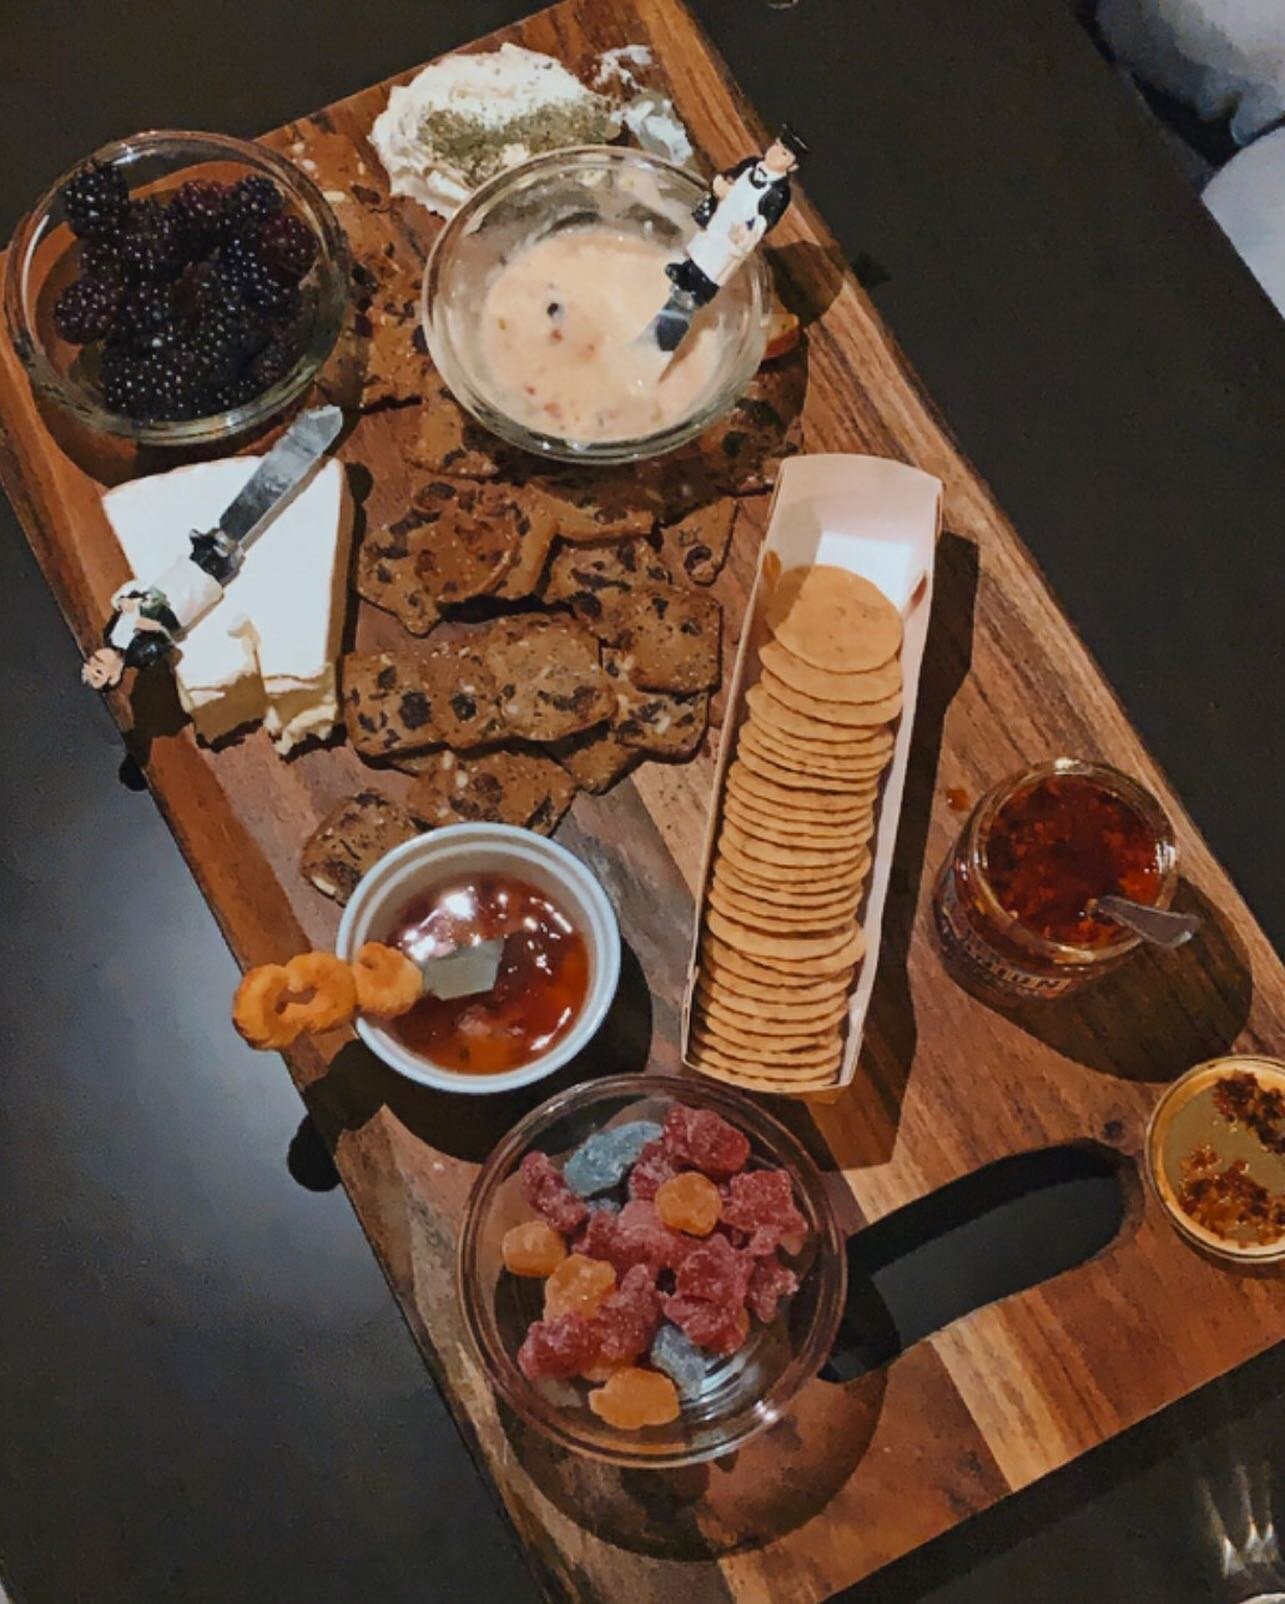 A charcuterie board kind-of-evening ✨ you truly can&rsquo;t beat an array of  @traderjoes goodies, chill music &amp; good company 😌